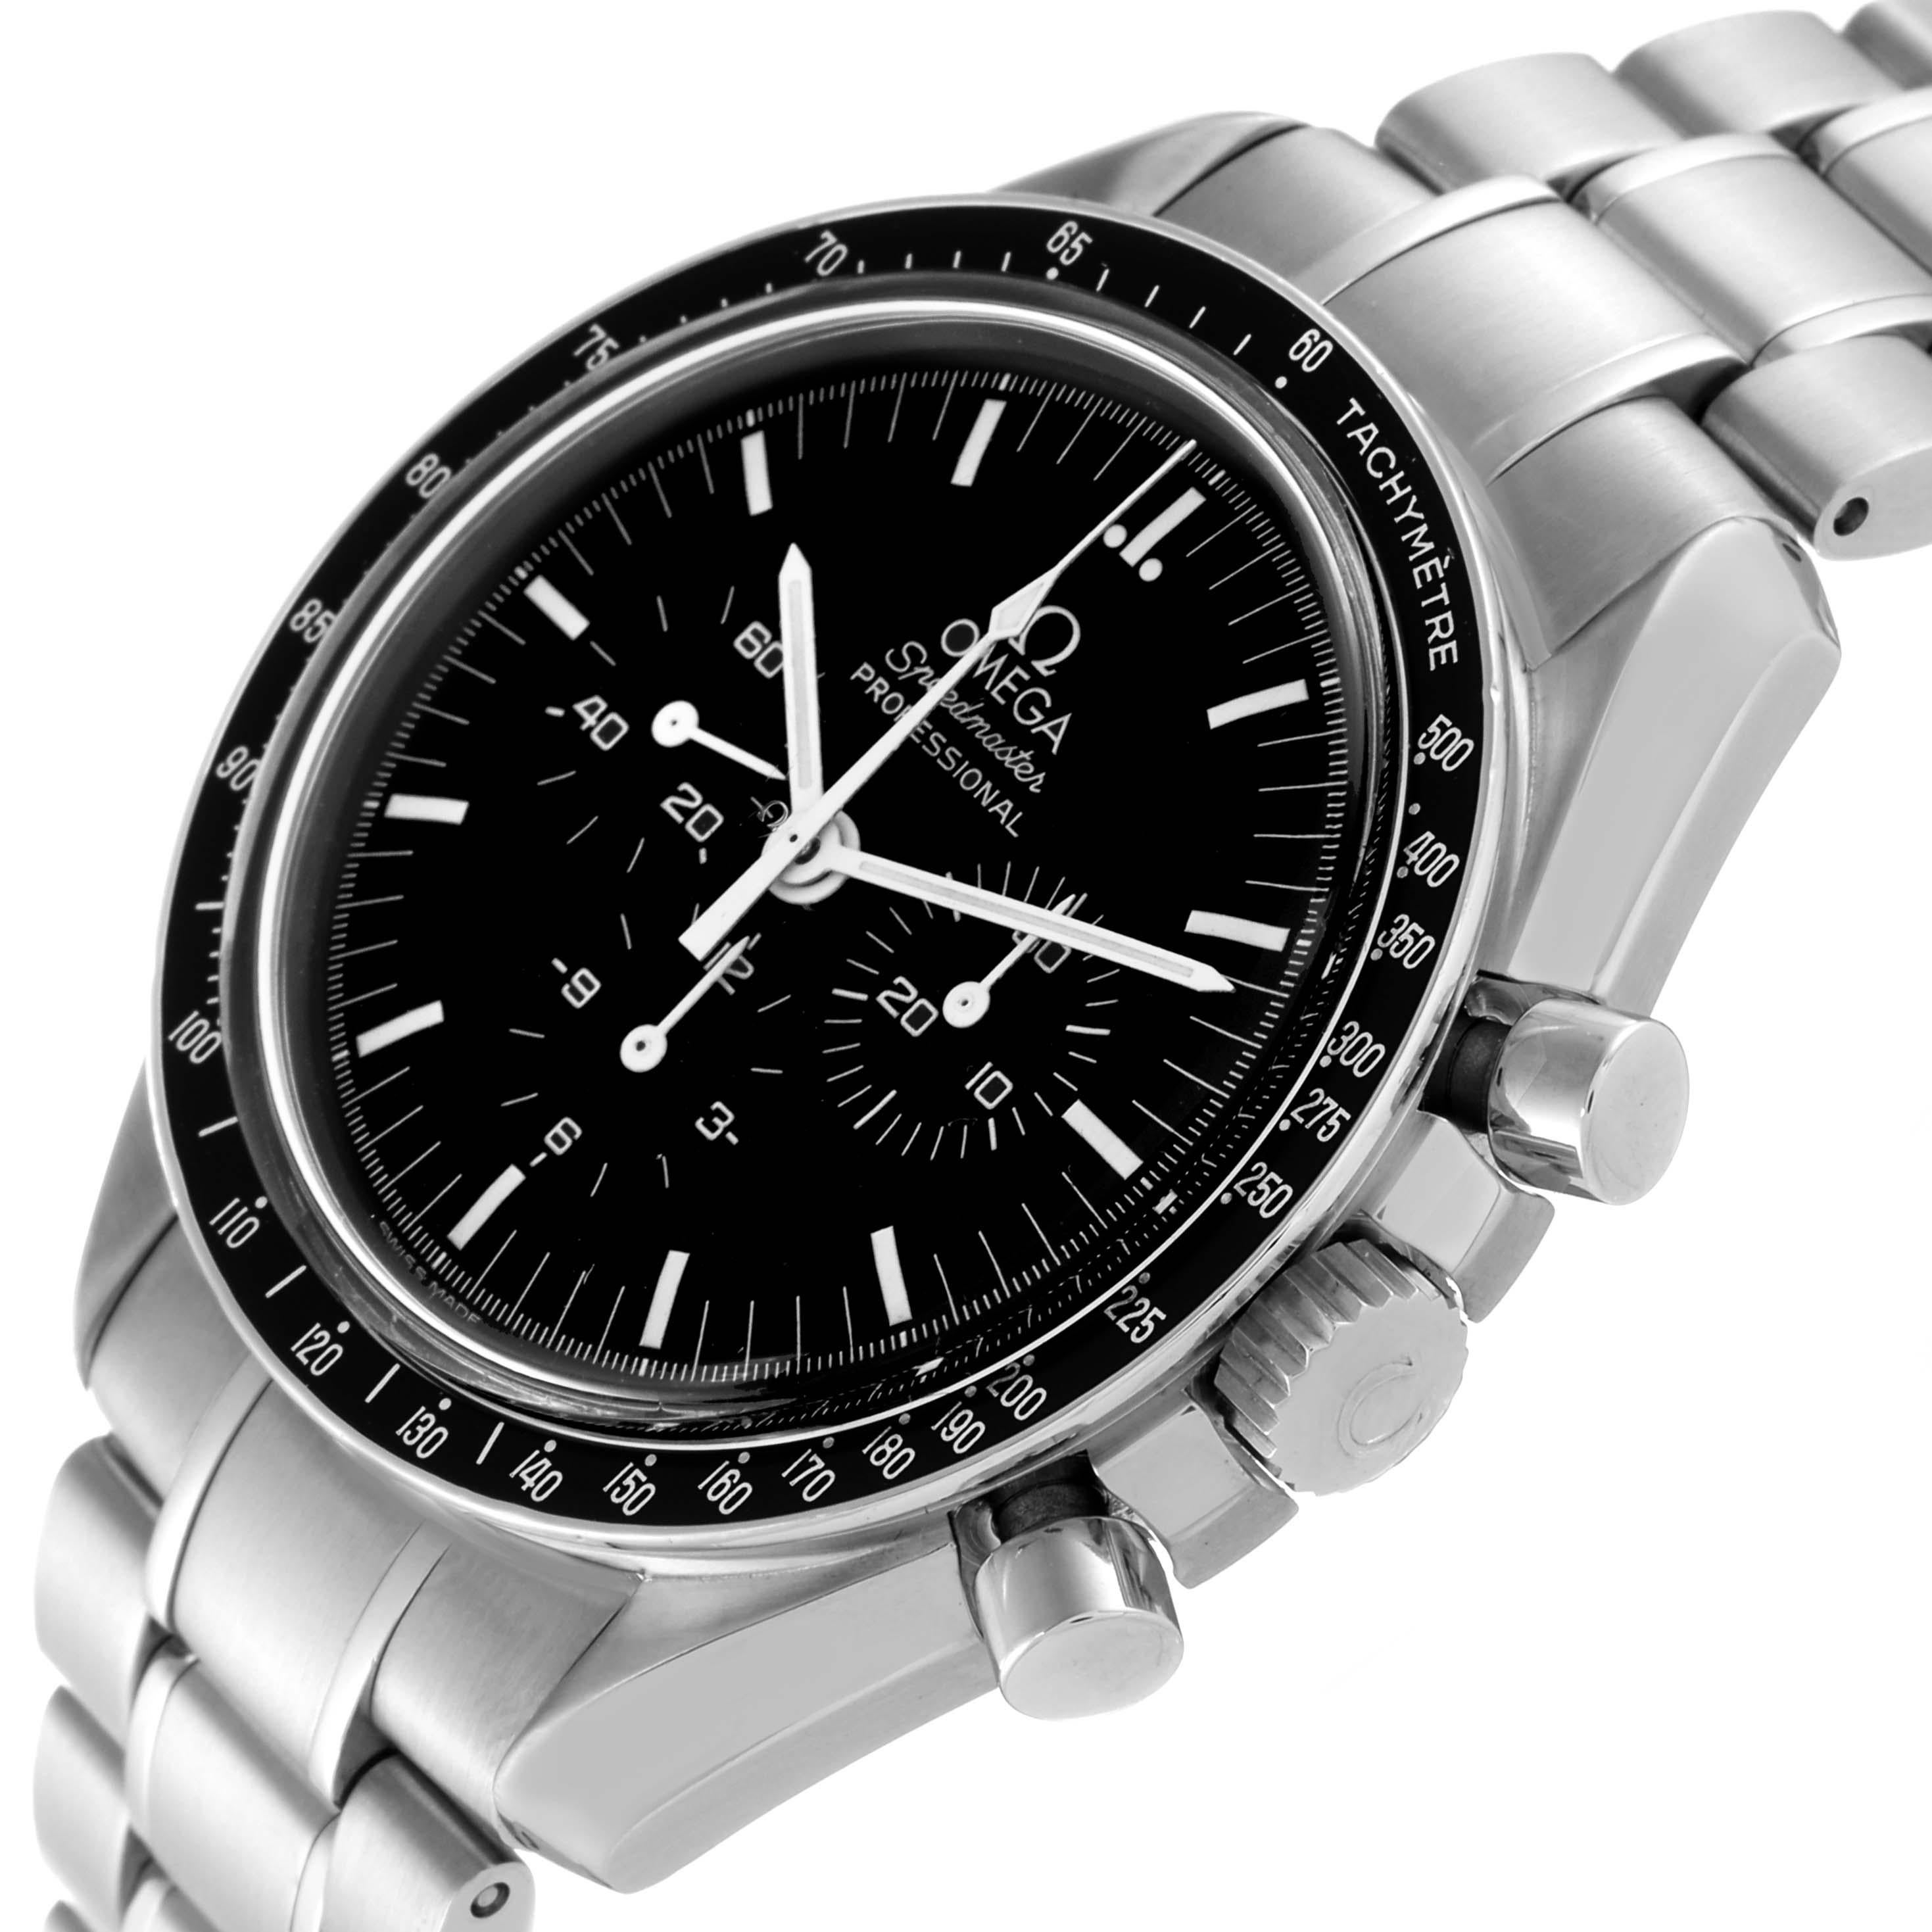 Men's Omega Speedmaster Apollo XVII Limited Edition Mens Watch 3574.51.00 Box Card For Sale